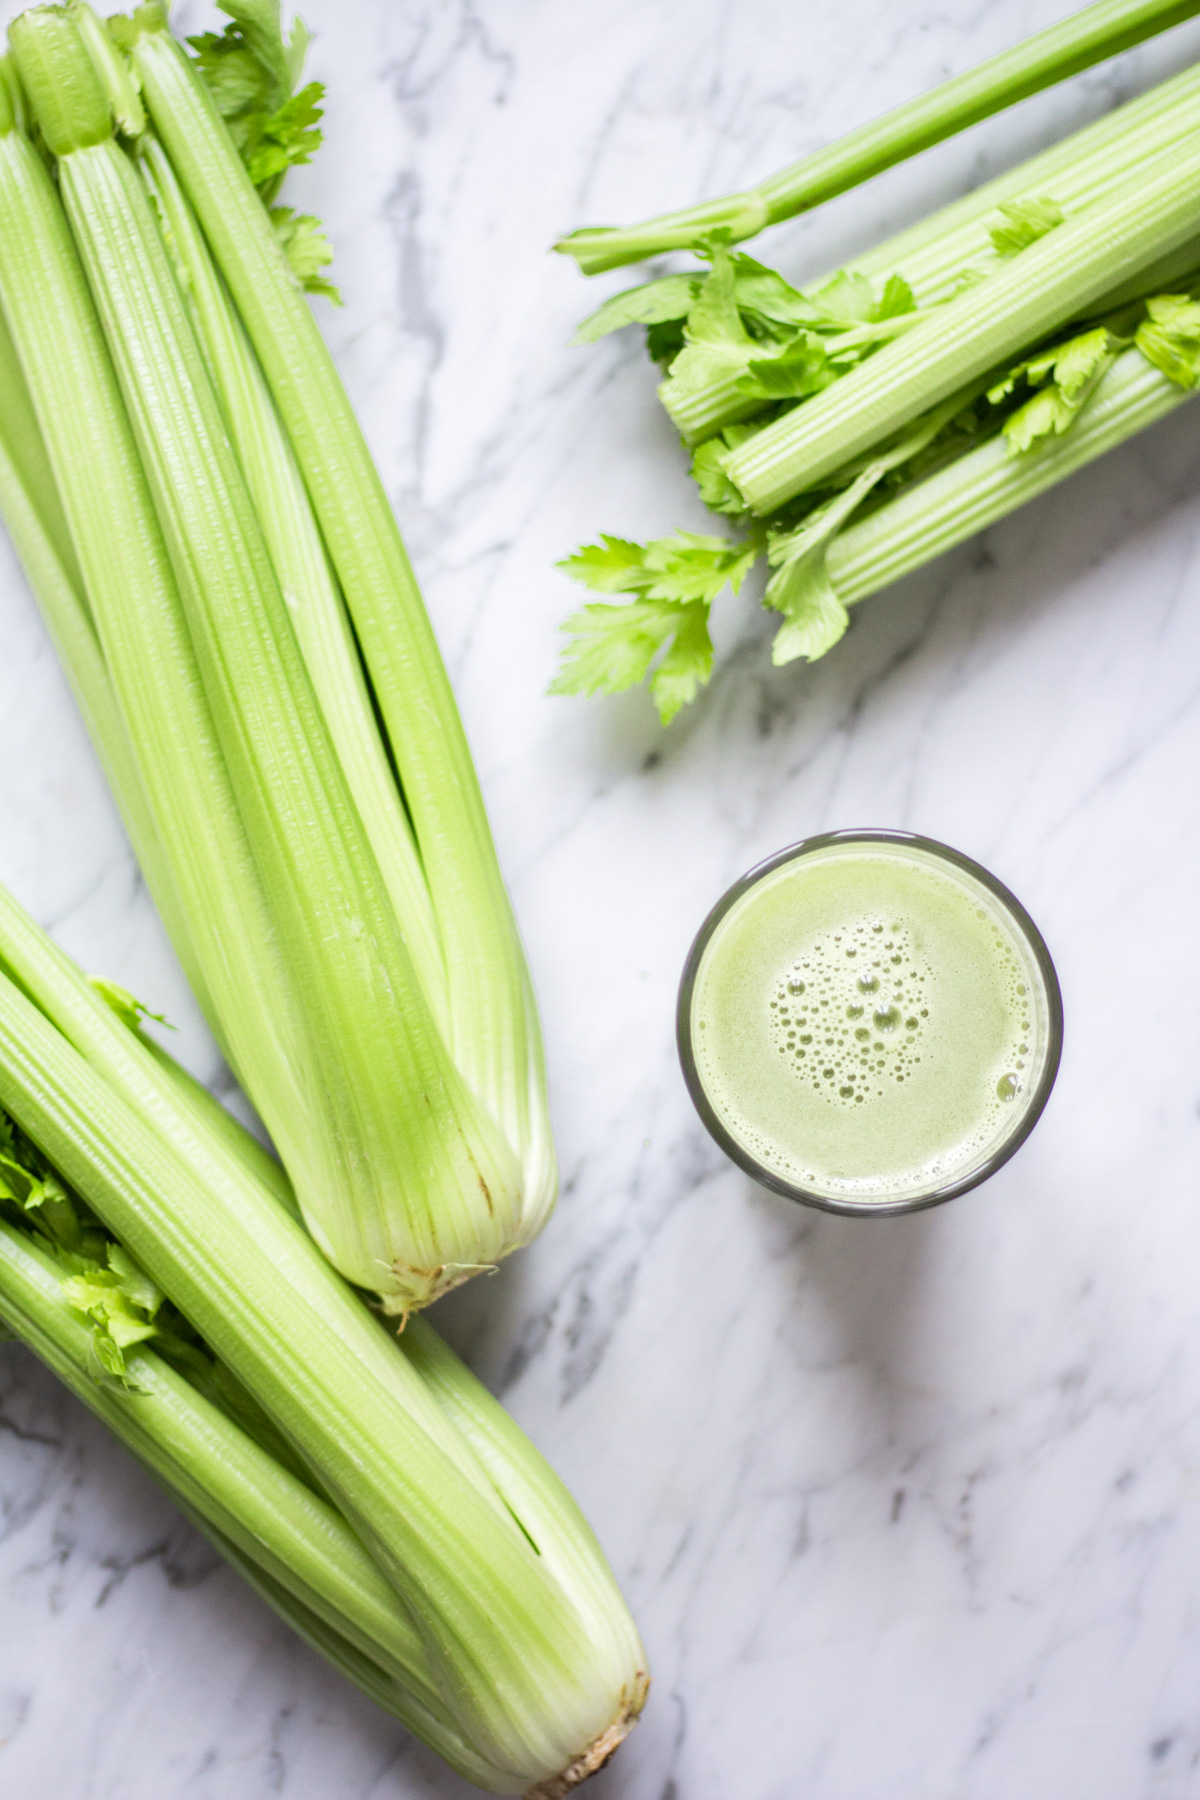 Celery - Best Foods to Boost Your Brain, Memory and Cognition